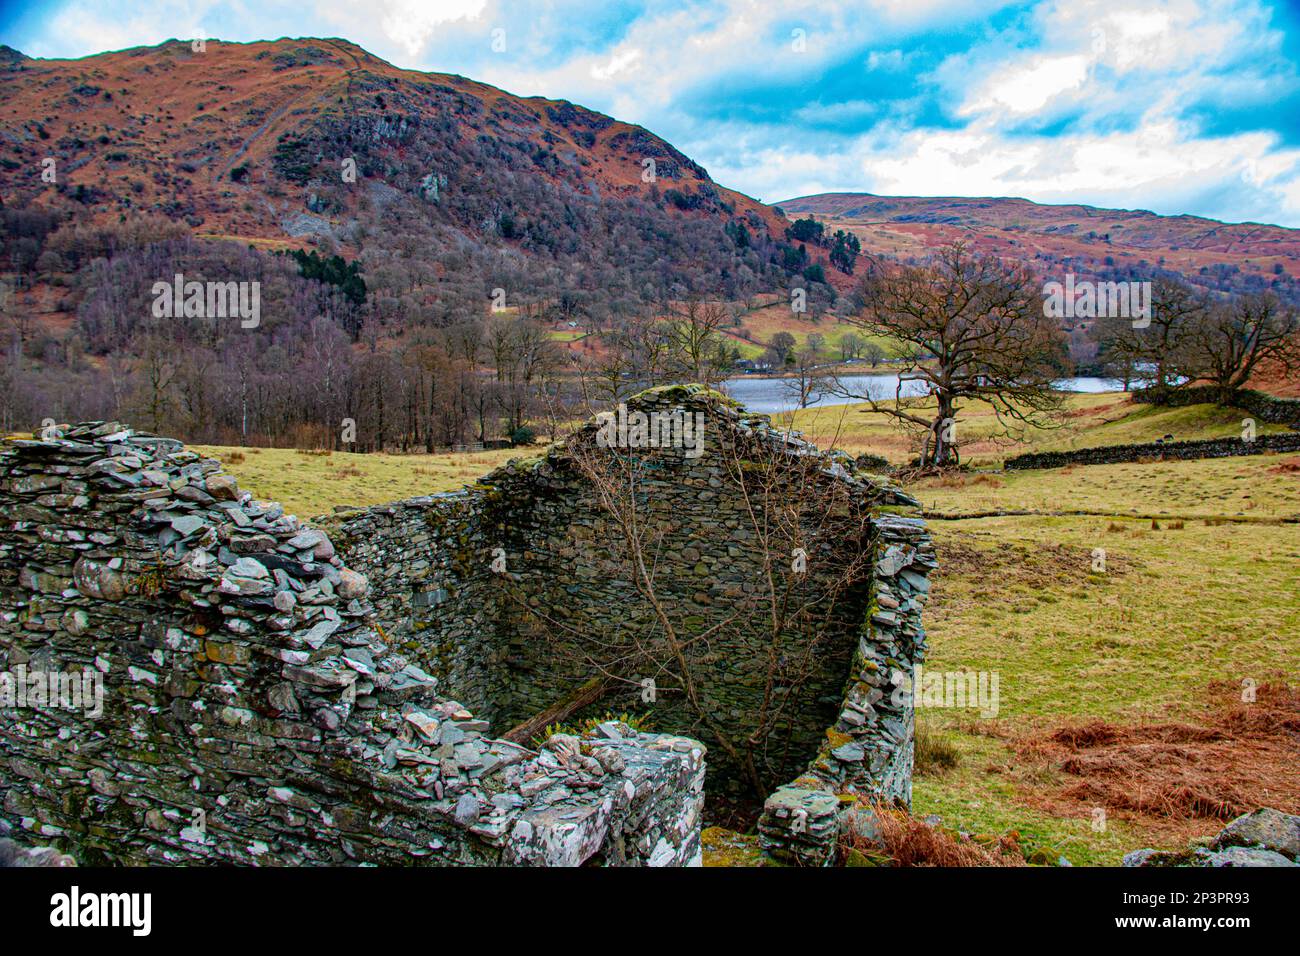 Abandoned barn in the Rydal Valley, overlooking Rydal Water & the River Rothay, Rydal, Cumbria, United Kingdom Stock Photo